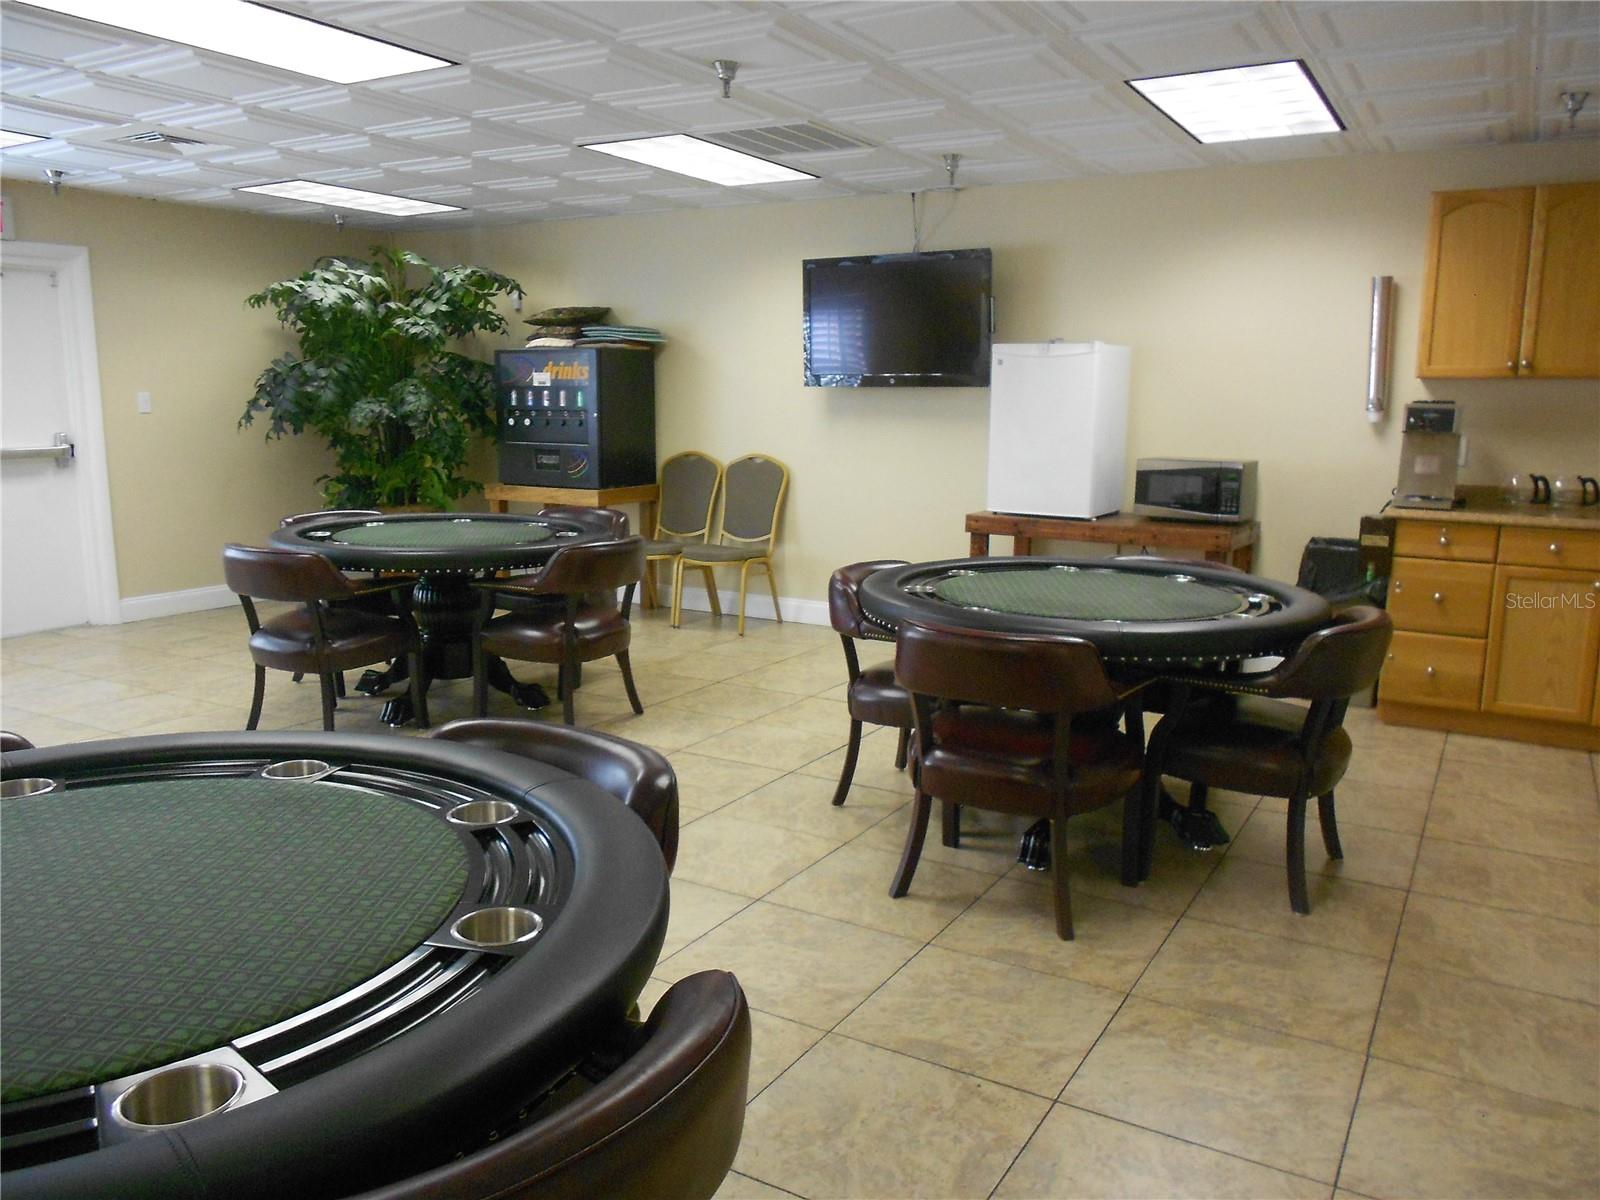 Poker and game tables